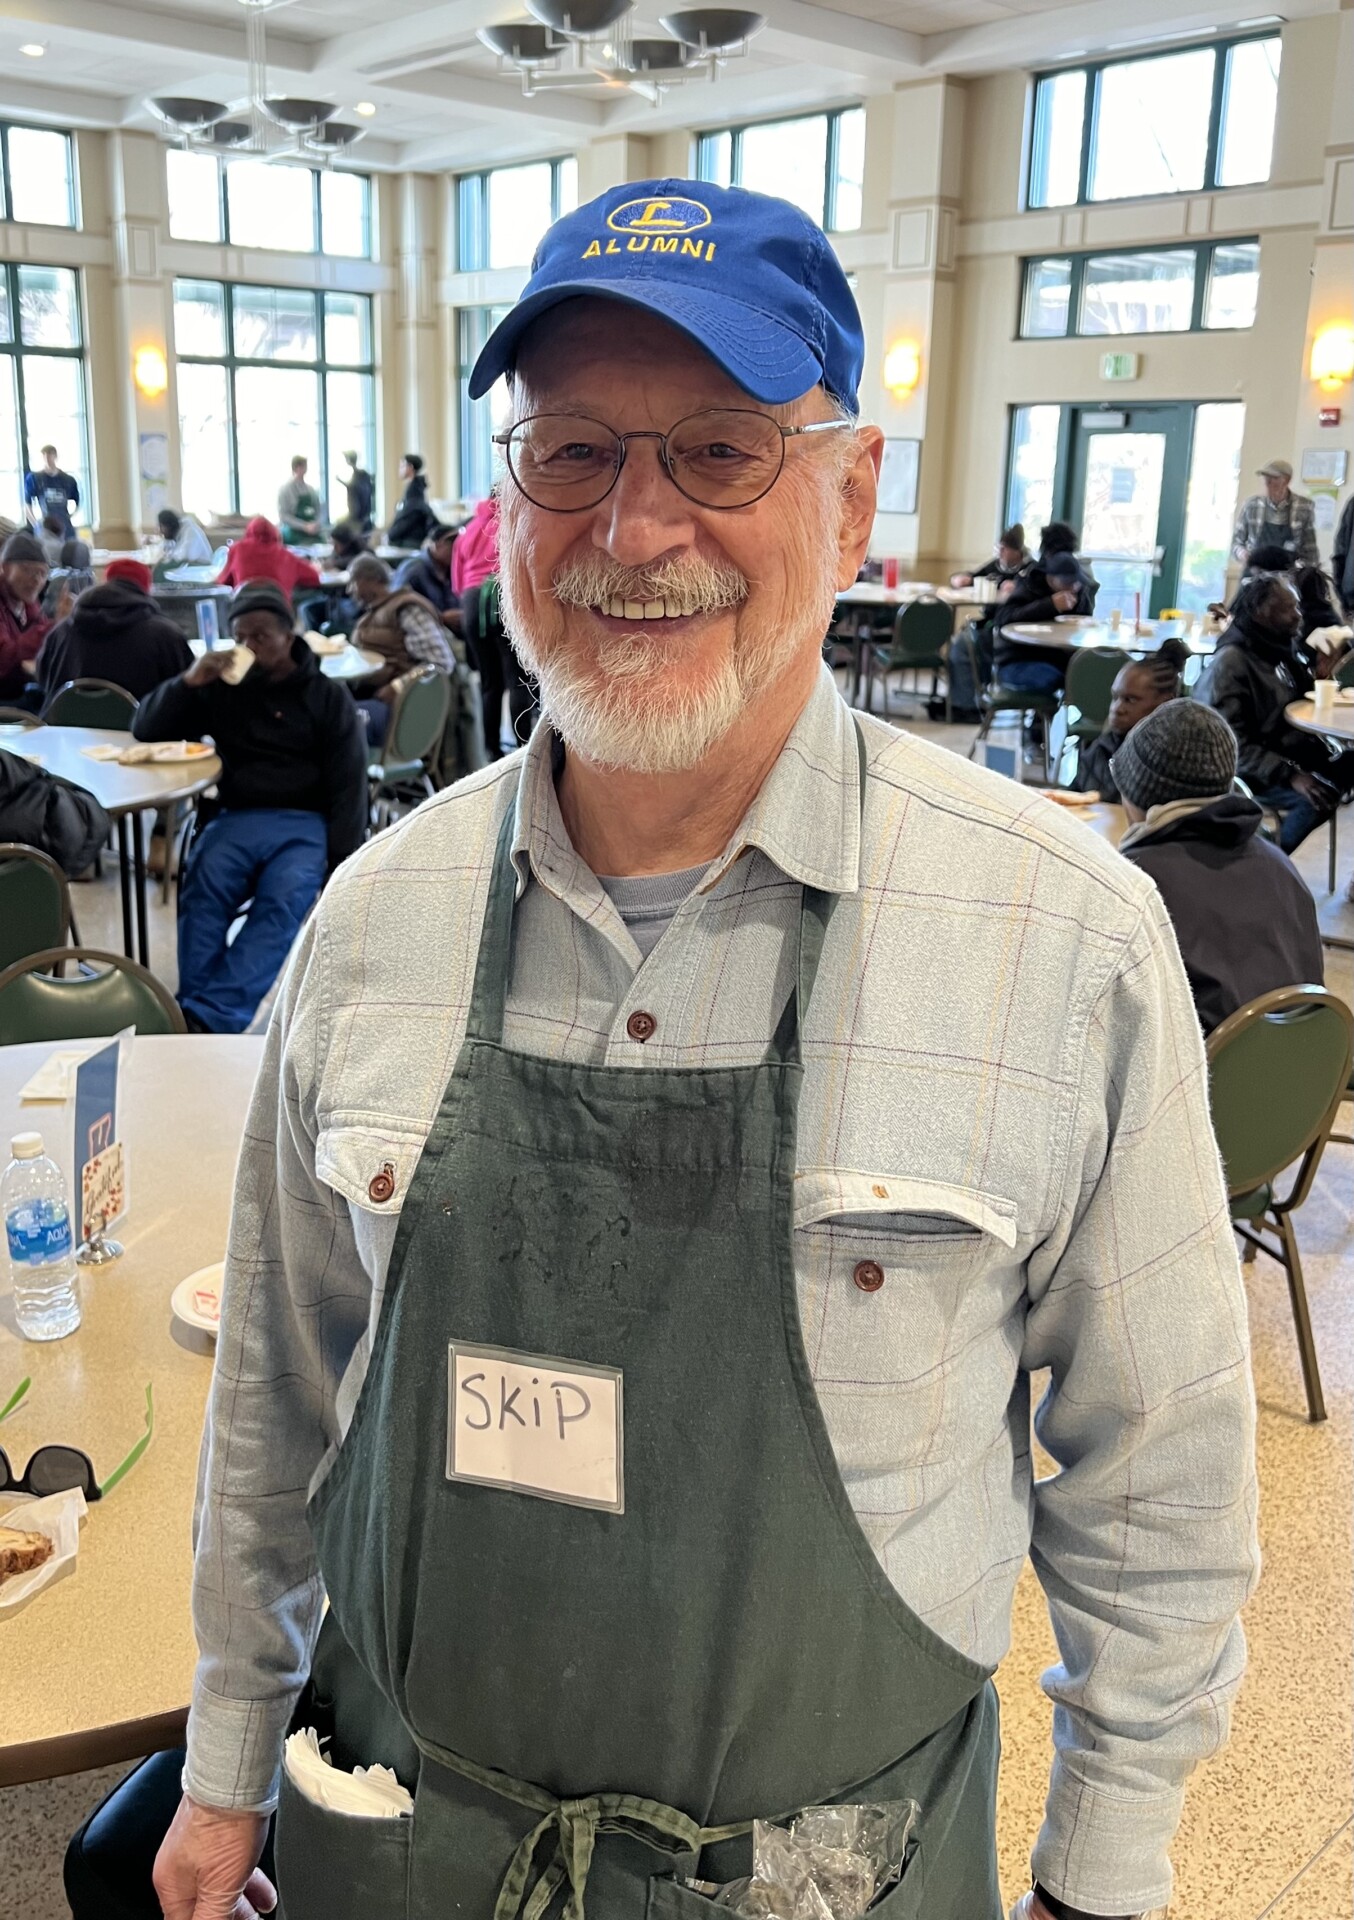 A man wearing an apron and a baseball cap smiles in a cafeteria.